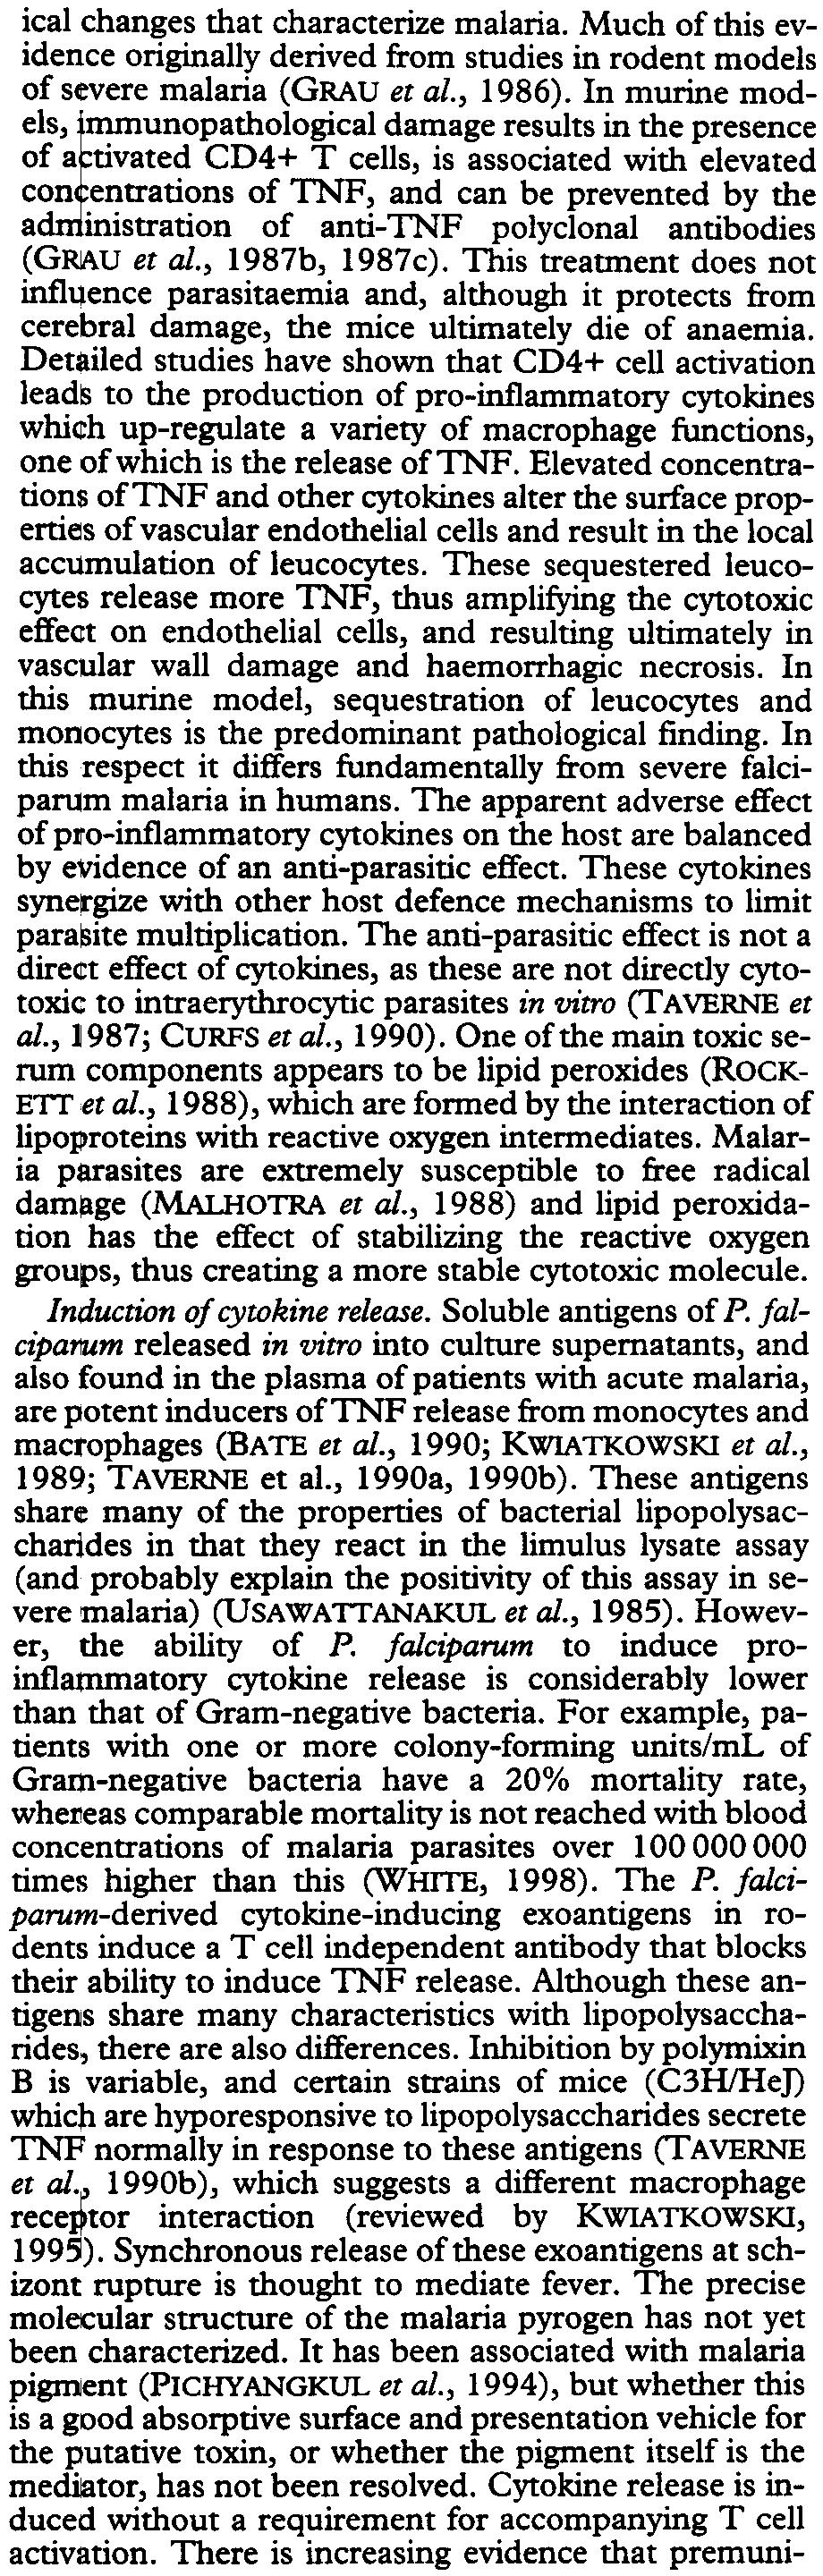 81/21 SEVERE FALCIPARUM MALARIA ical changes that characterize malaria. Much of this evidence originally derived from studies in rodent models of severe malaria (GRAU et al., 1986).